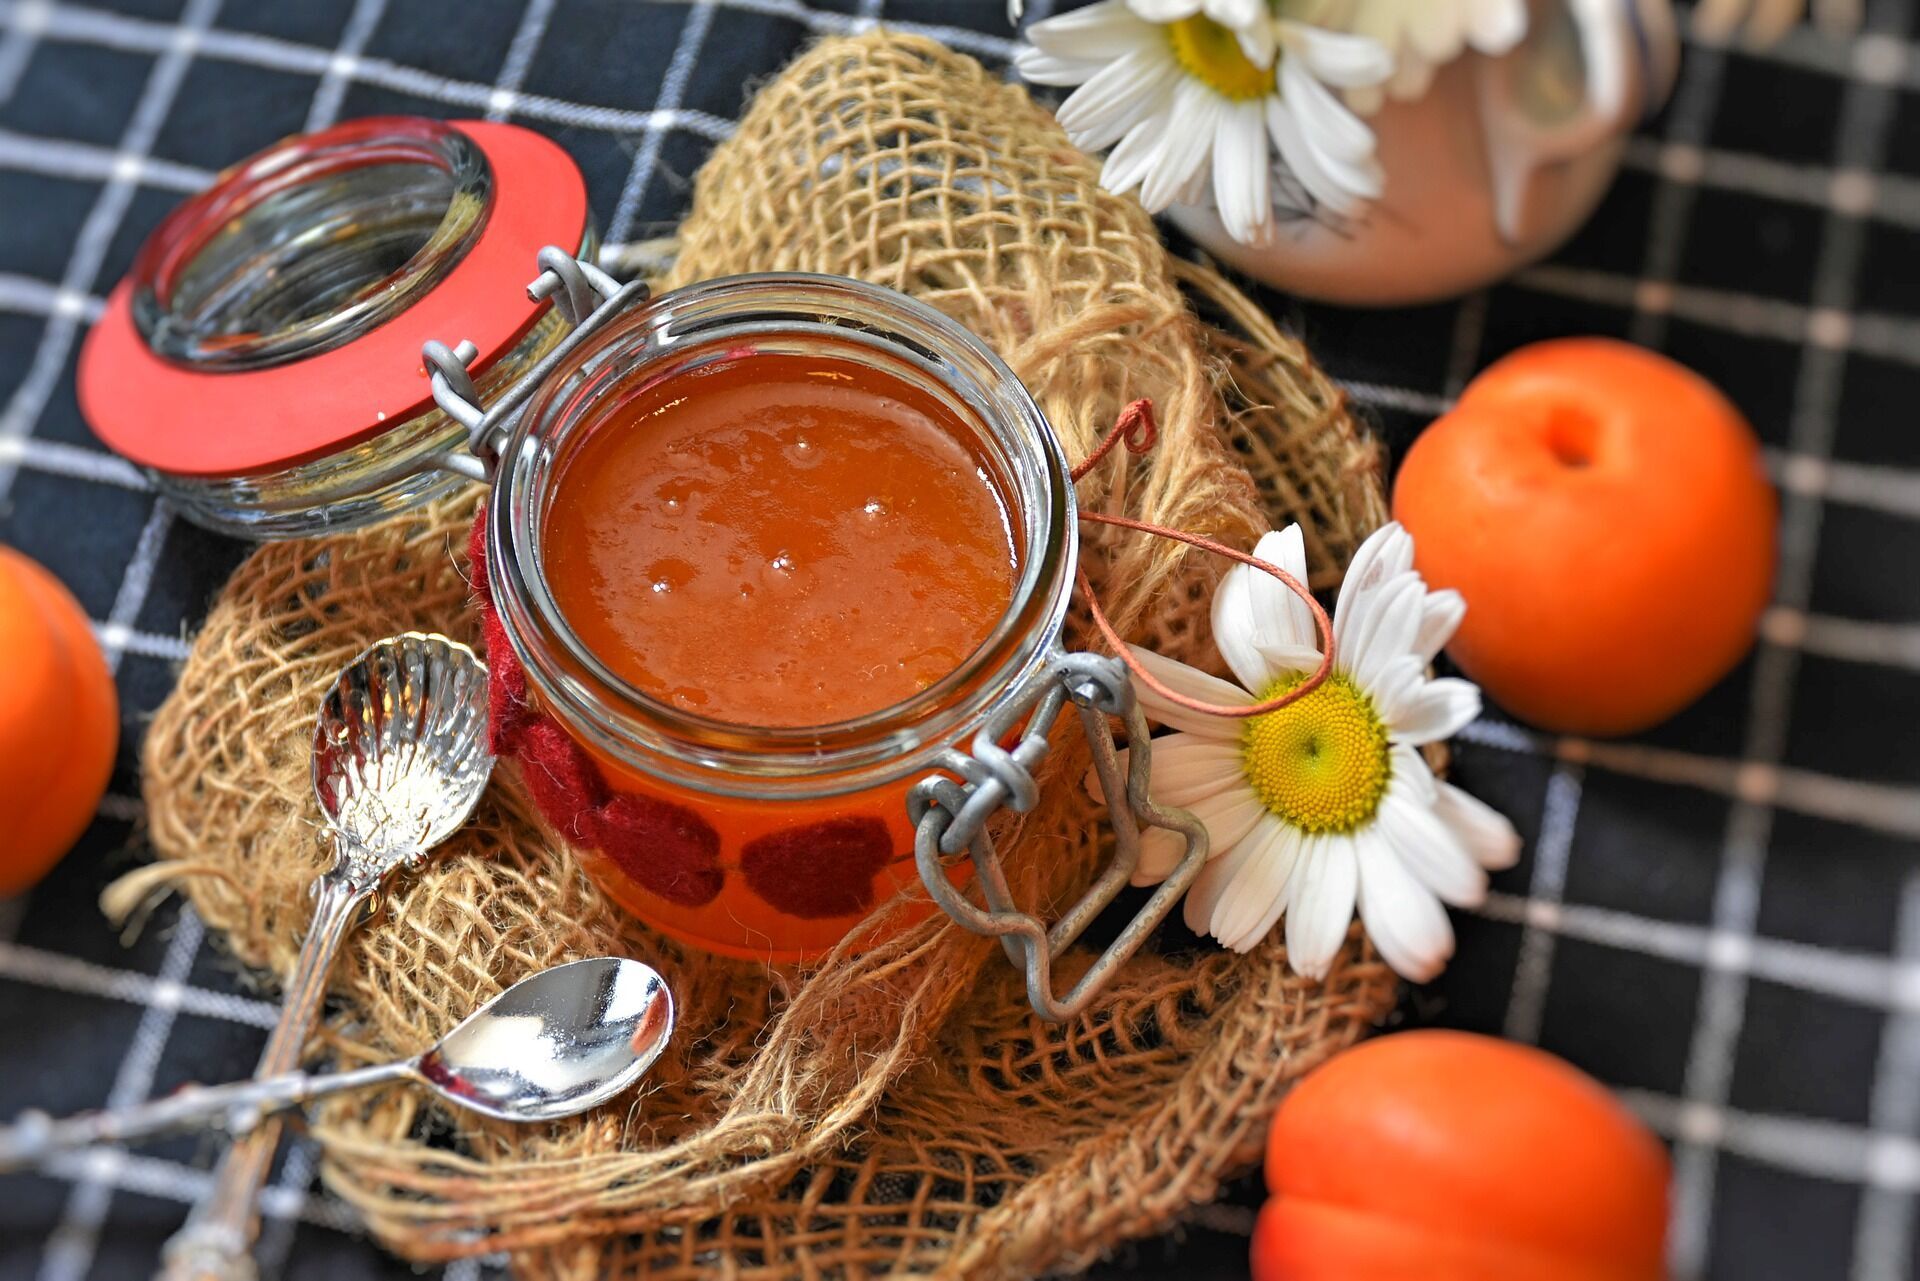 How to make apricot jam deliciously and correctly at home